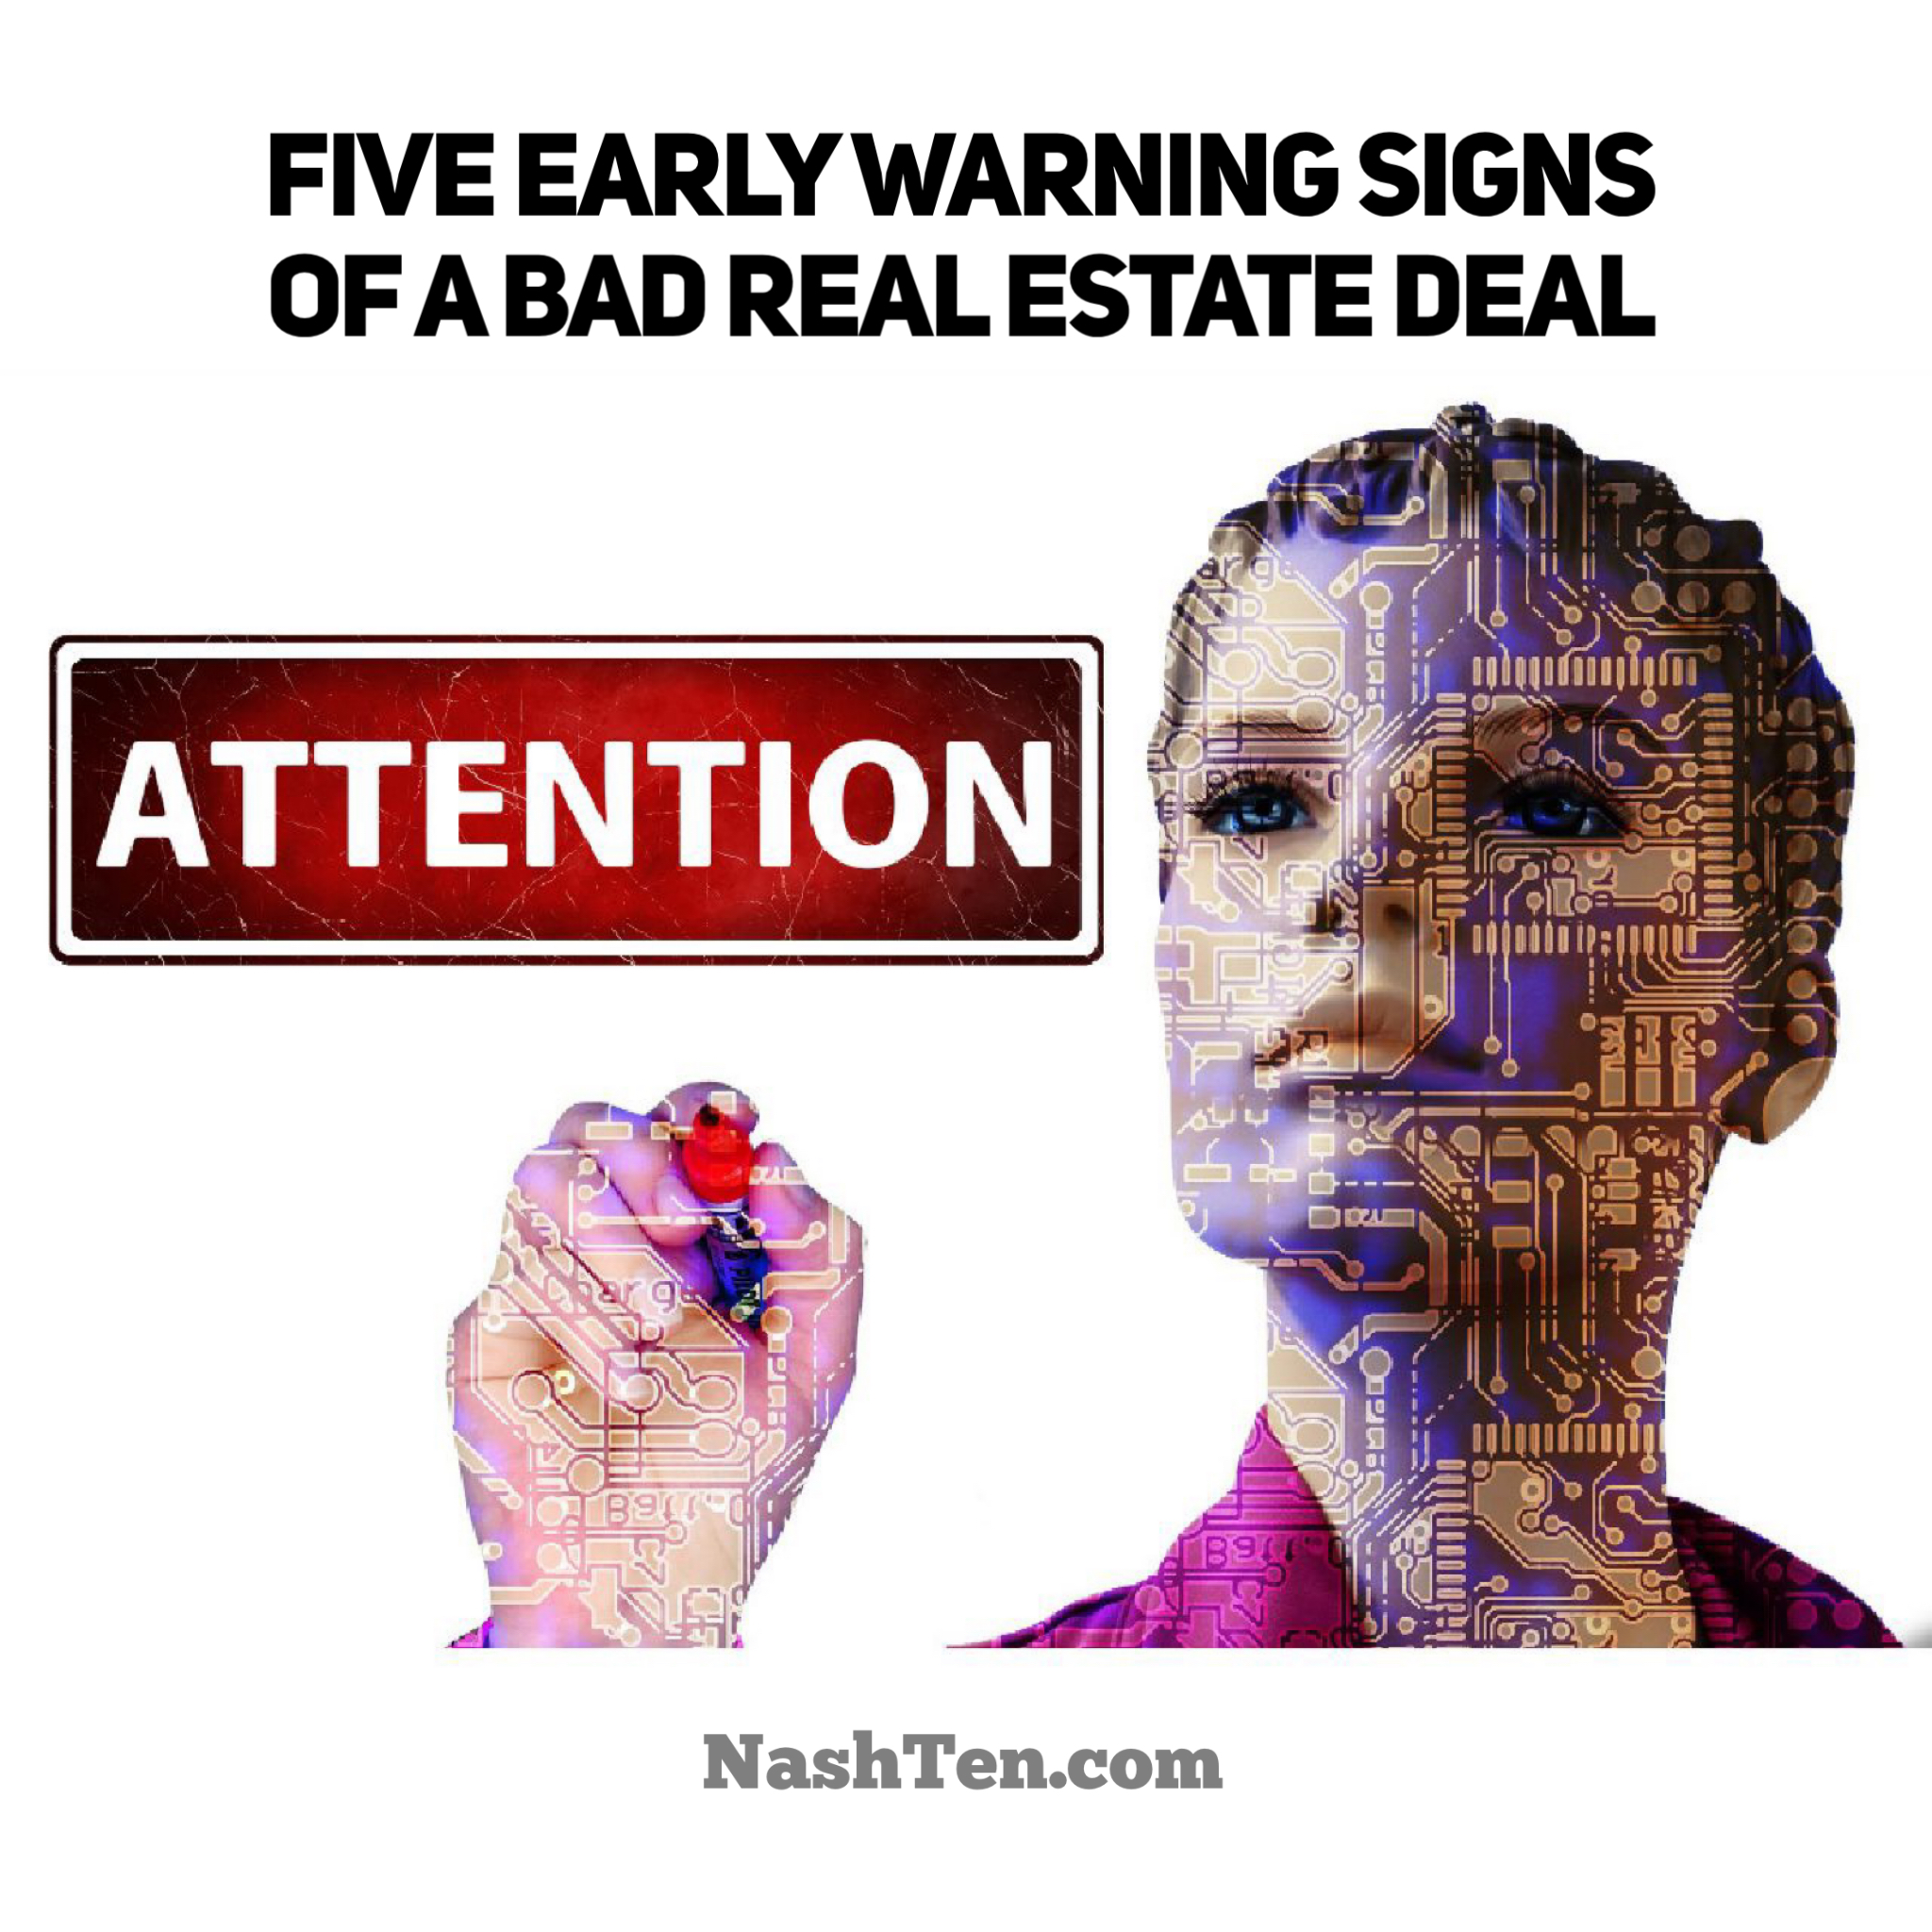 5 Early Warning Signs of a Bad Real Estate Deal